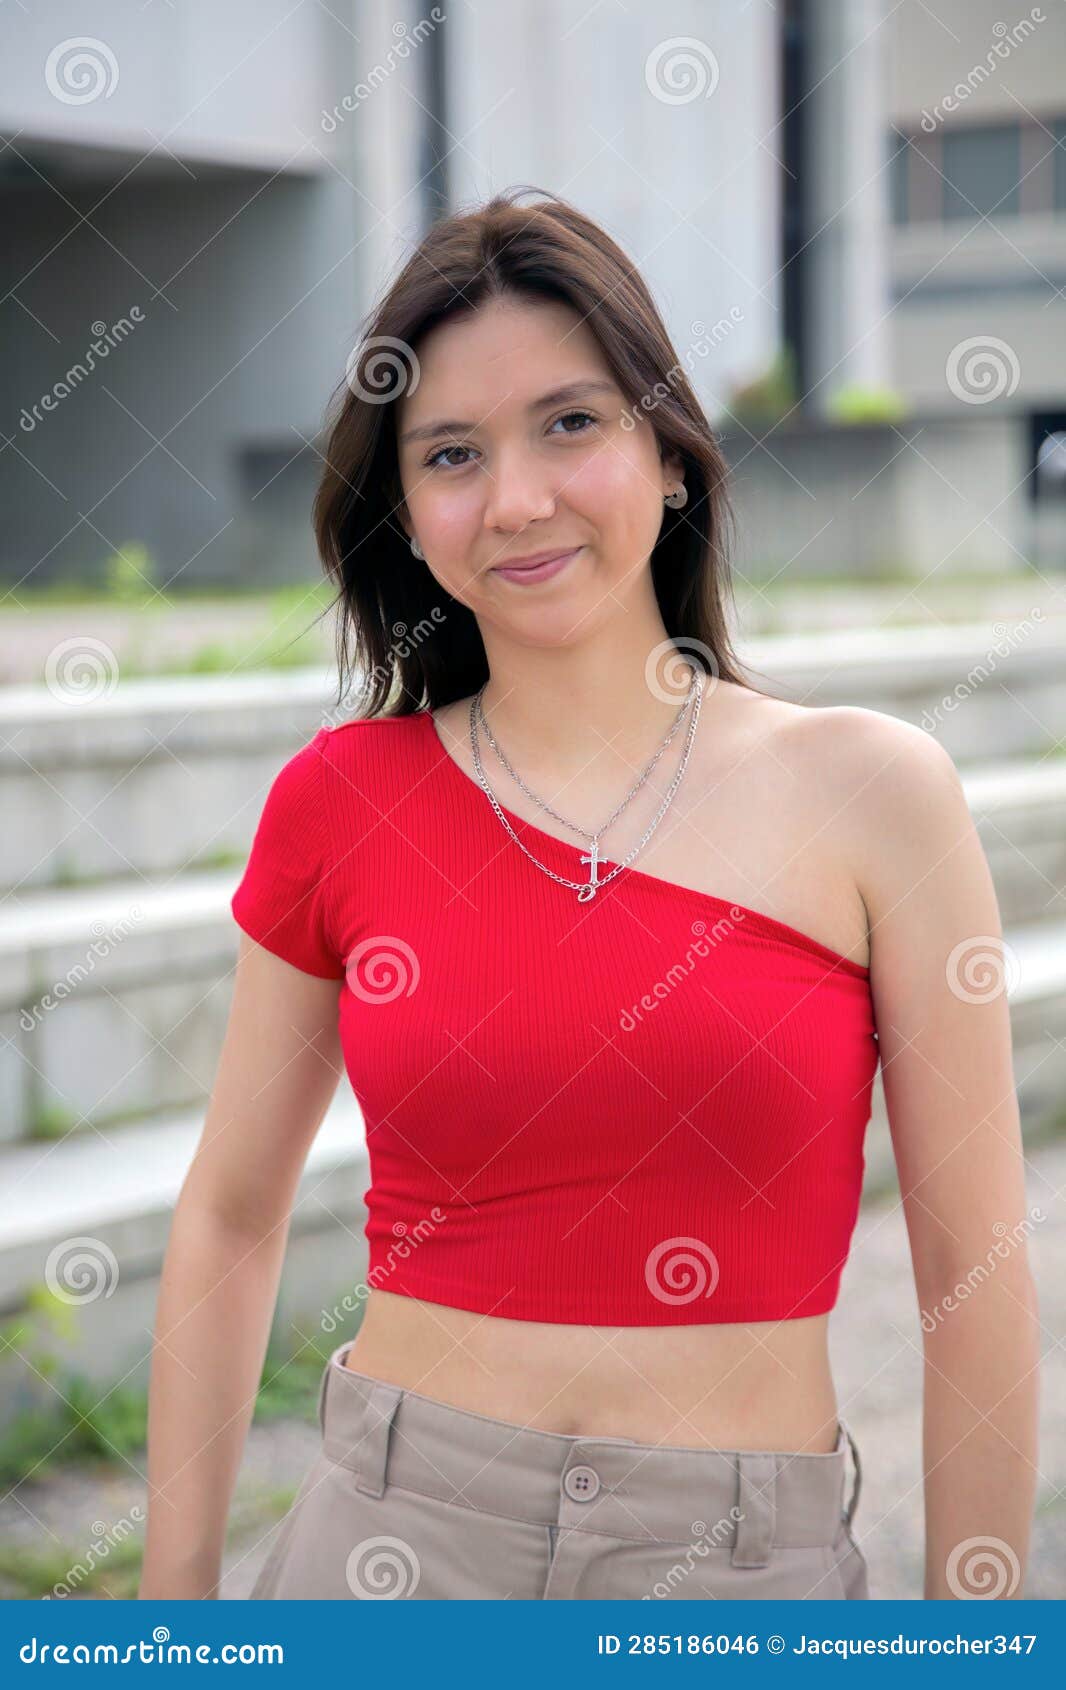 Woman Wearing a Red Top Camisole in the City during Summer Stock Photo -  Image of woman, blond: 285186046